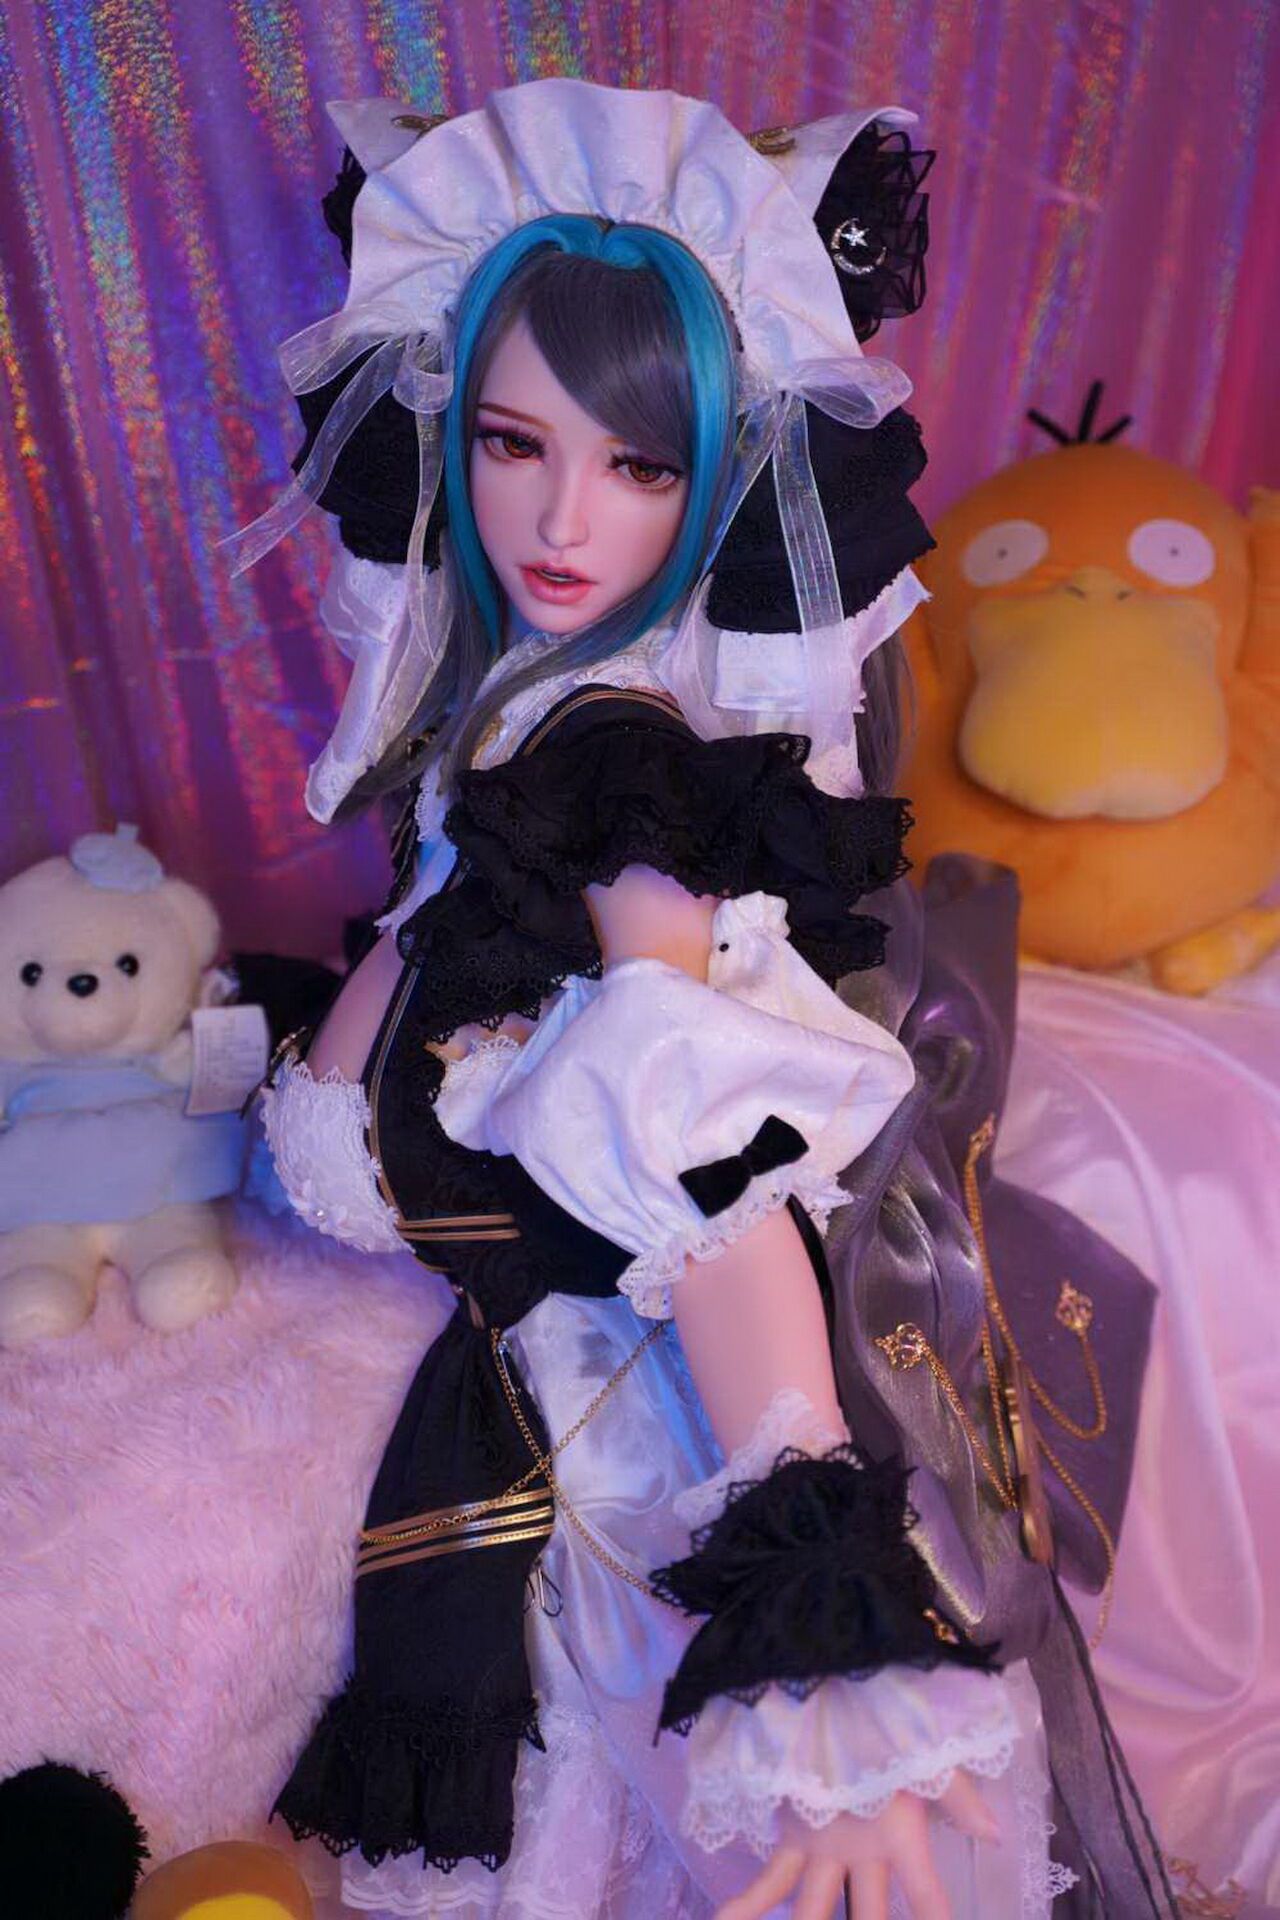 Meow meow meow, your personal maid Cheshire Meow Cosplay is here !! by Little pickled cucumber @devil_sama8844 31